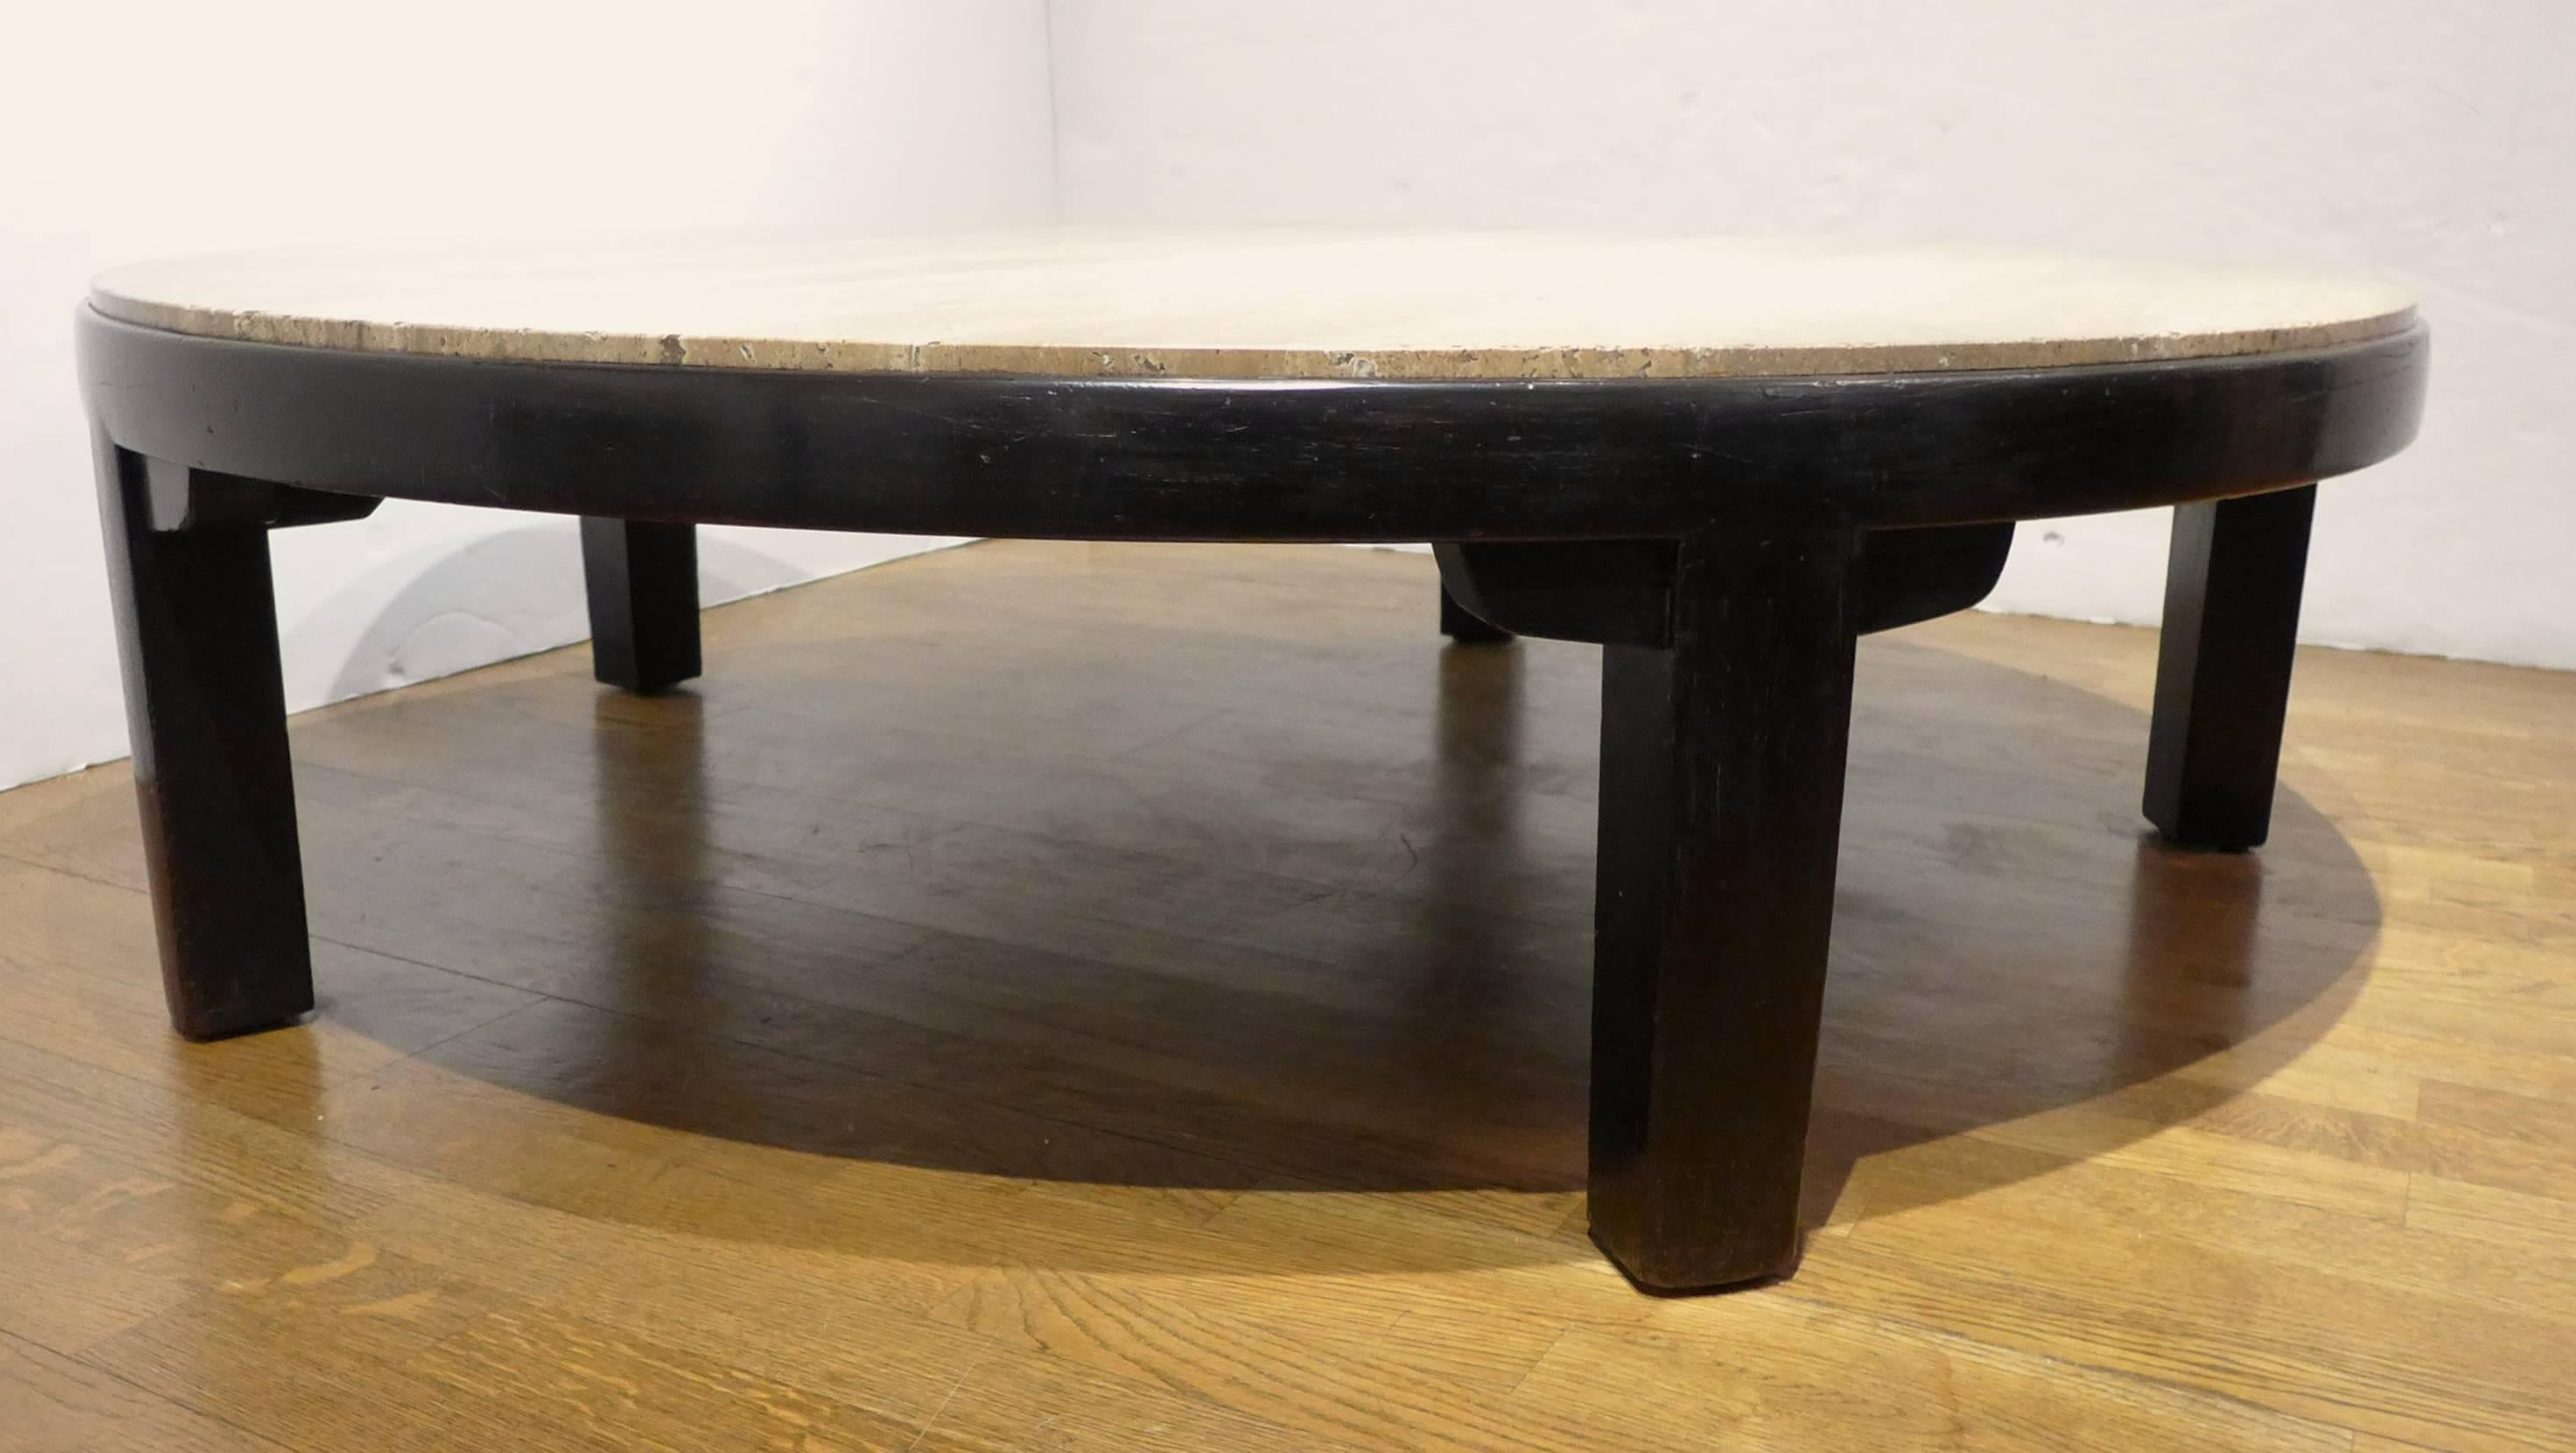 Large round cocktail table with dark mahogany base and figured travertine marble top in shades of tan, brown and gray. A clean, Asian-inflected modern form designed by Edward Wormley for Dunbar Furniture and produced, circa 1960. The base has been